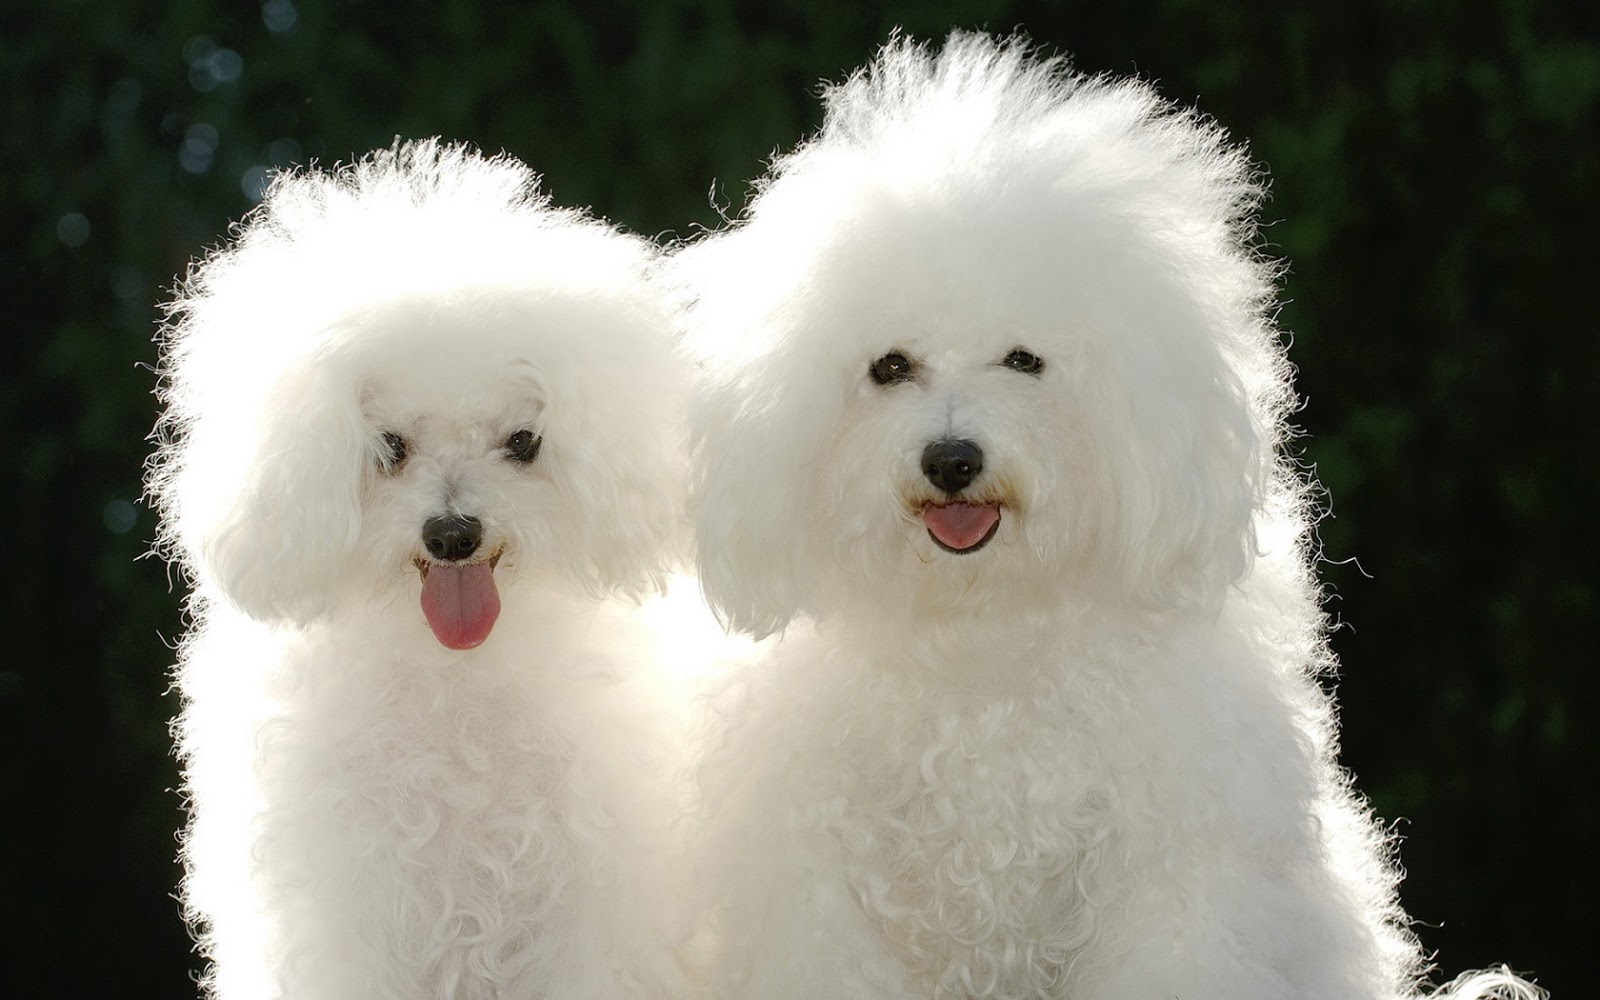 Cute Puppy Dogs: Poodle Puppies